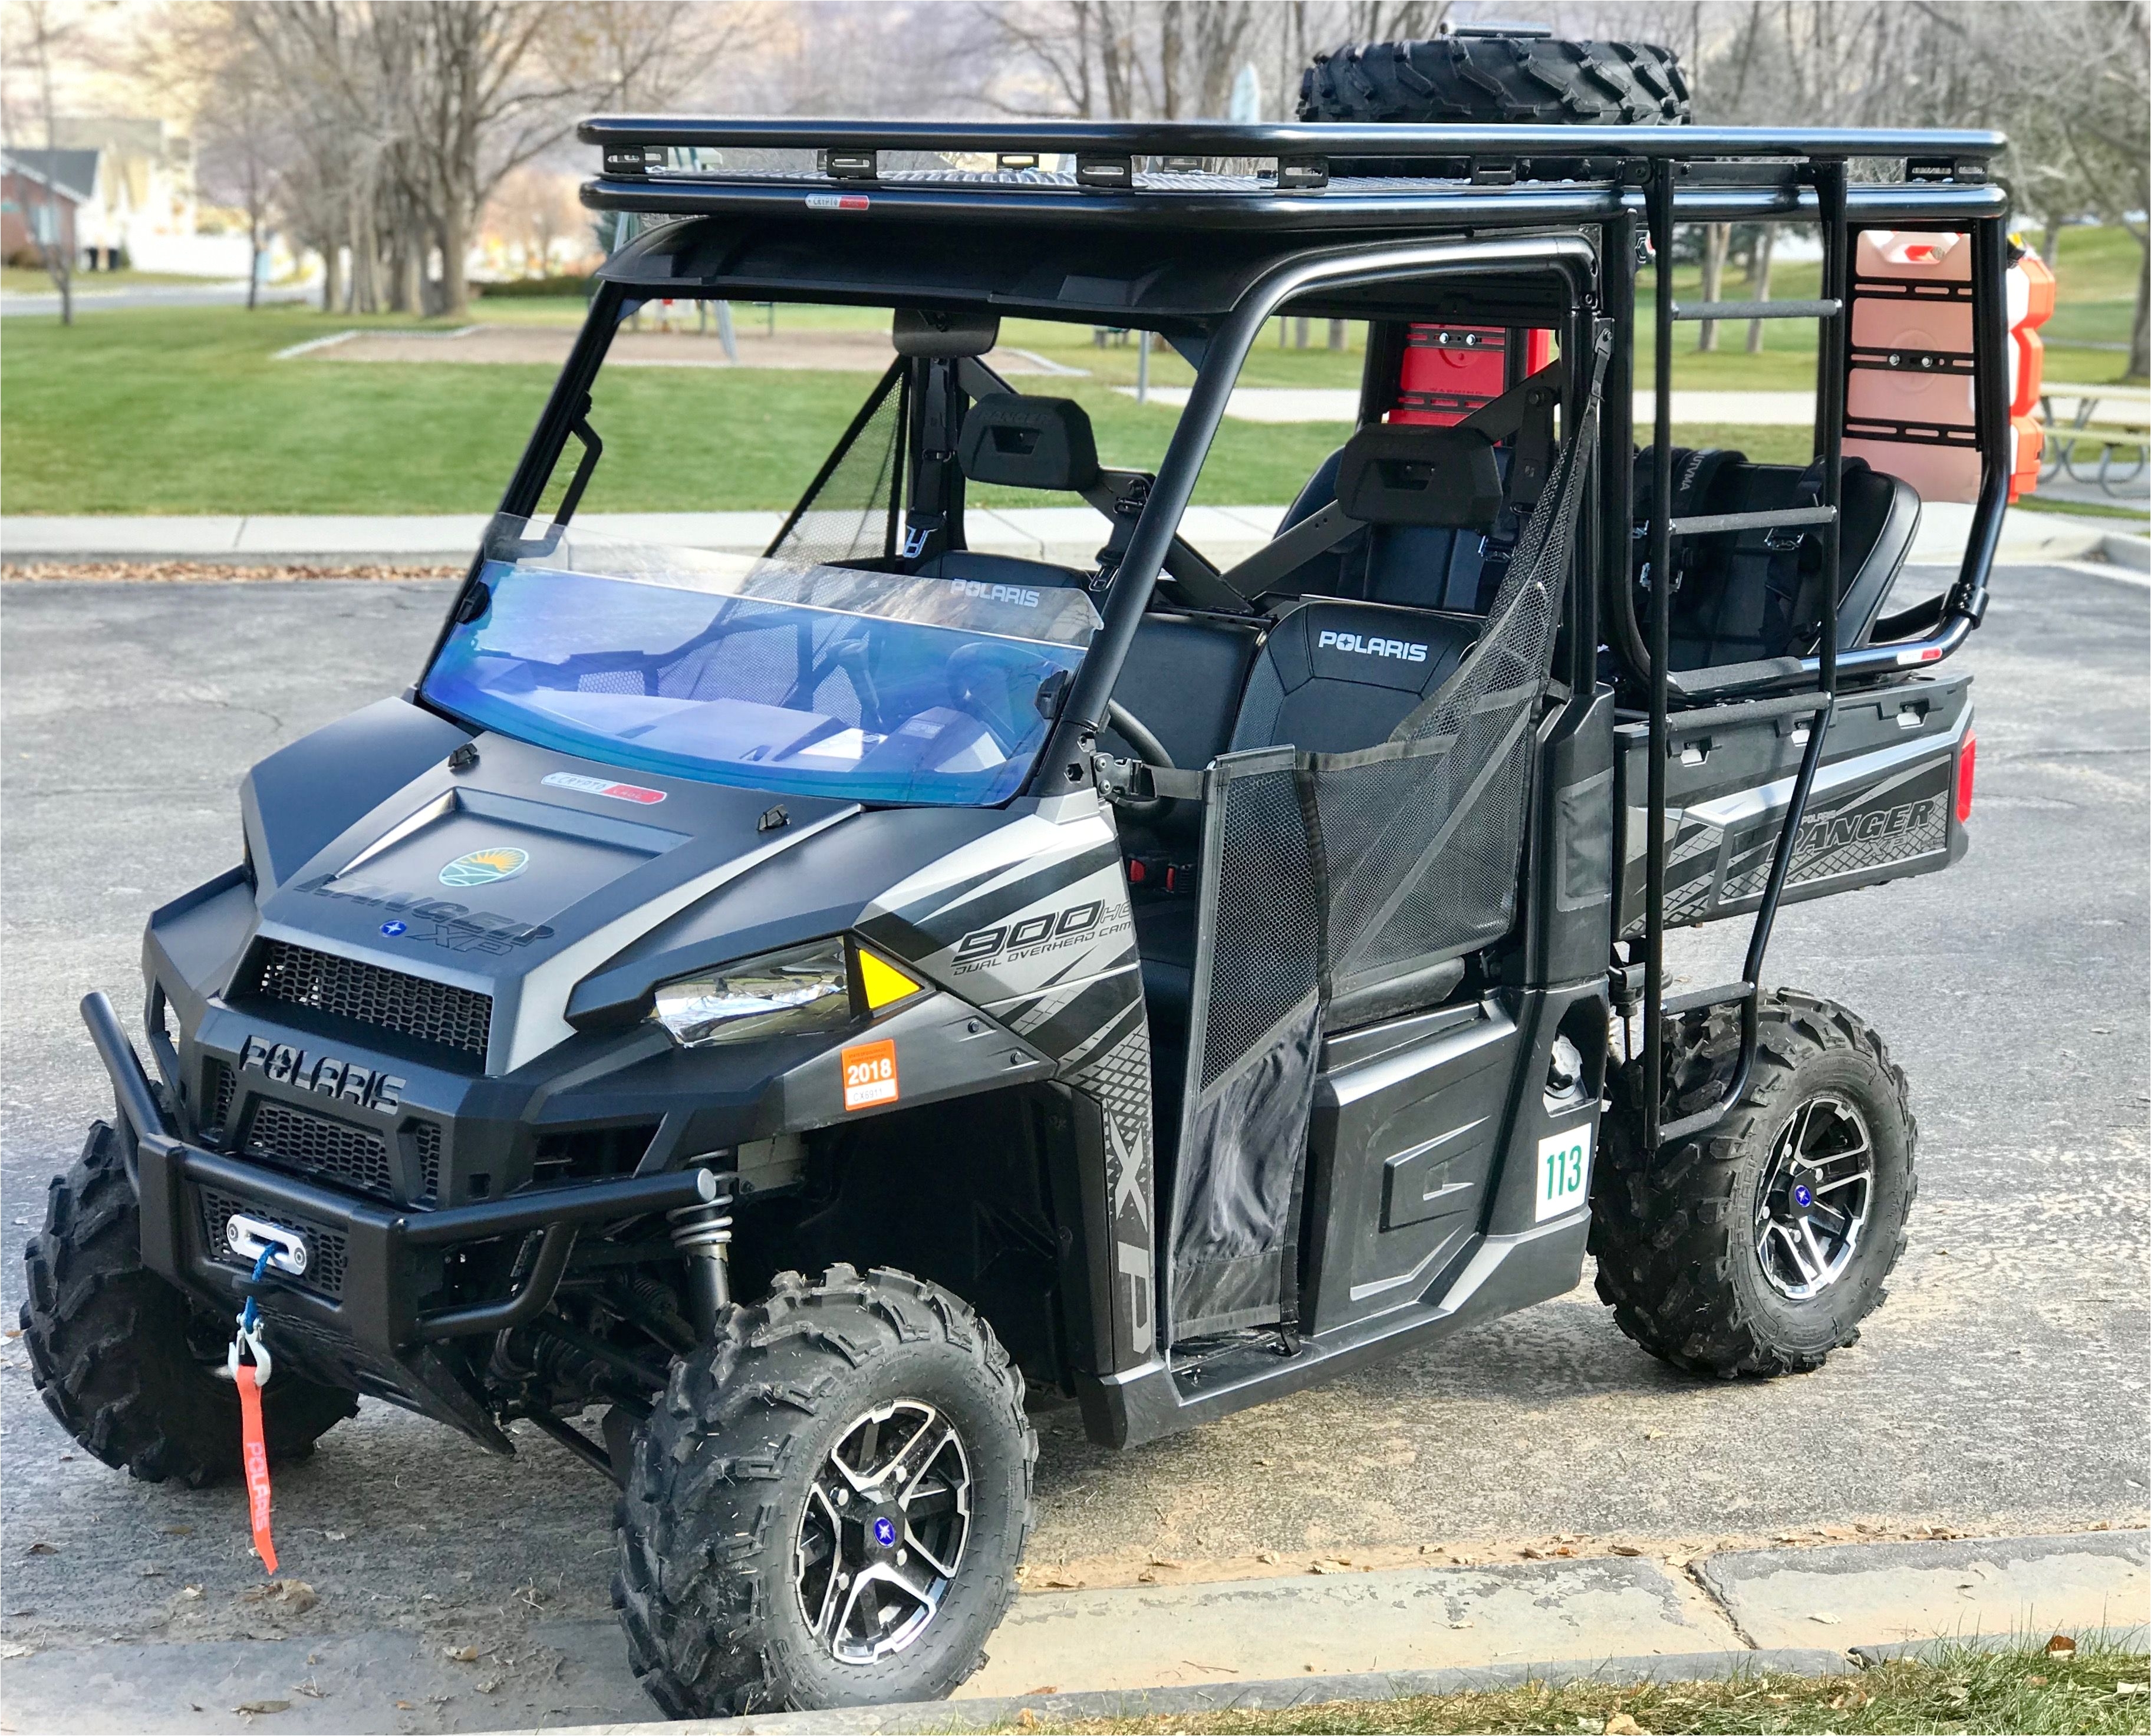 cryptocage introduces the kong cage for the polaris ranger 900 and 1000 the kong cage